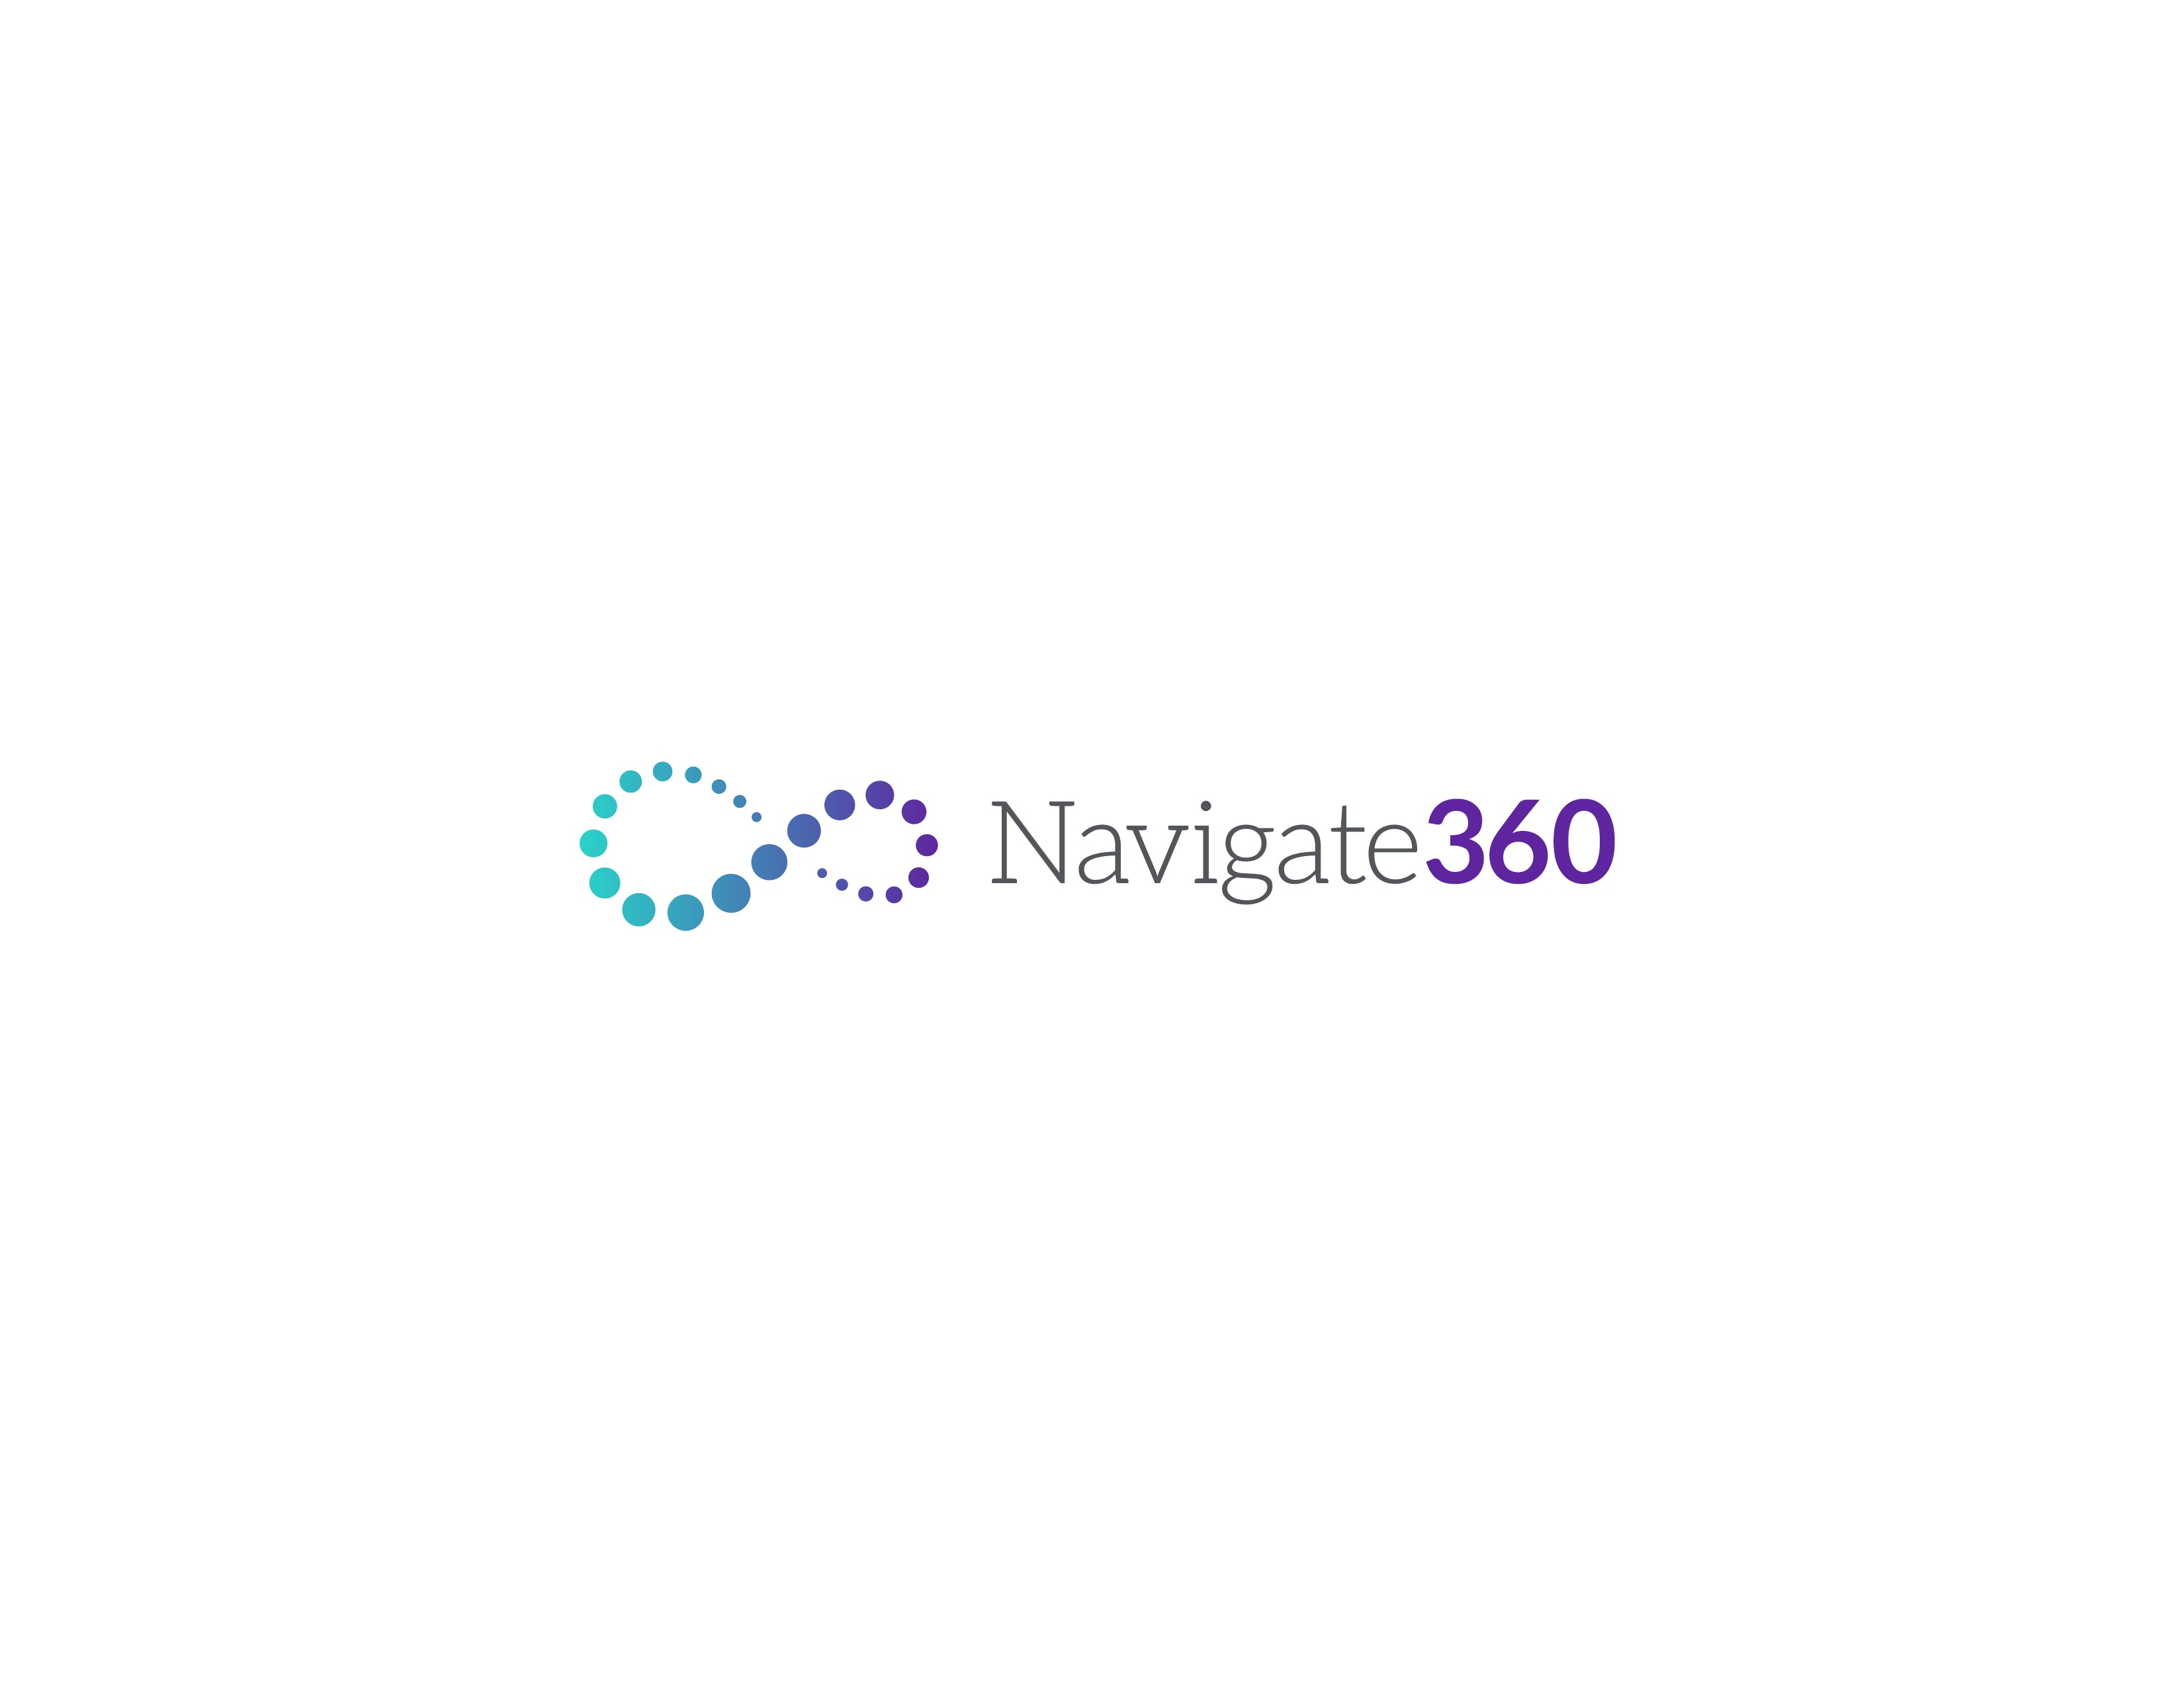 The Navigate360 Store